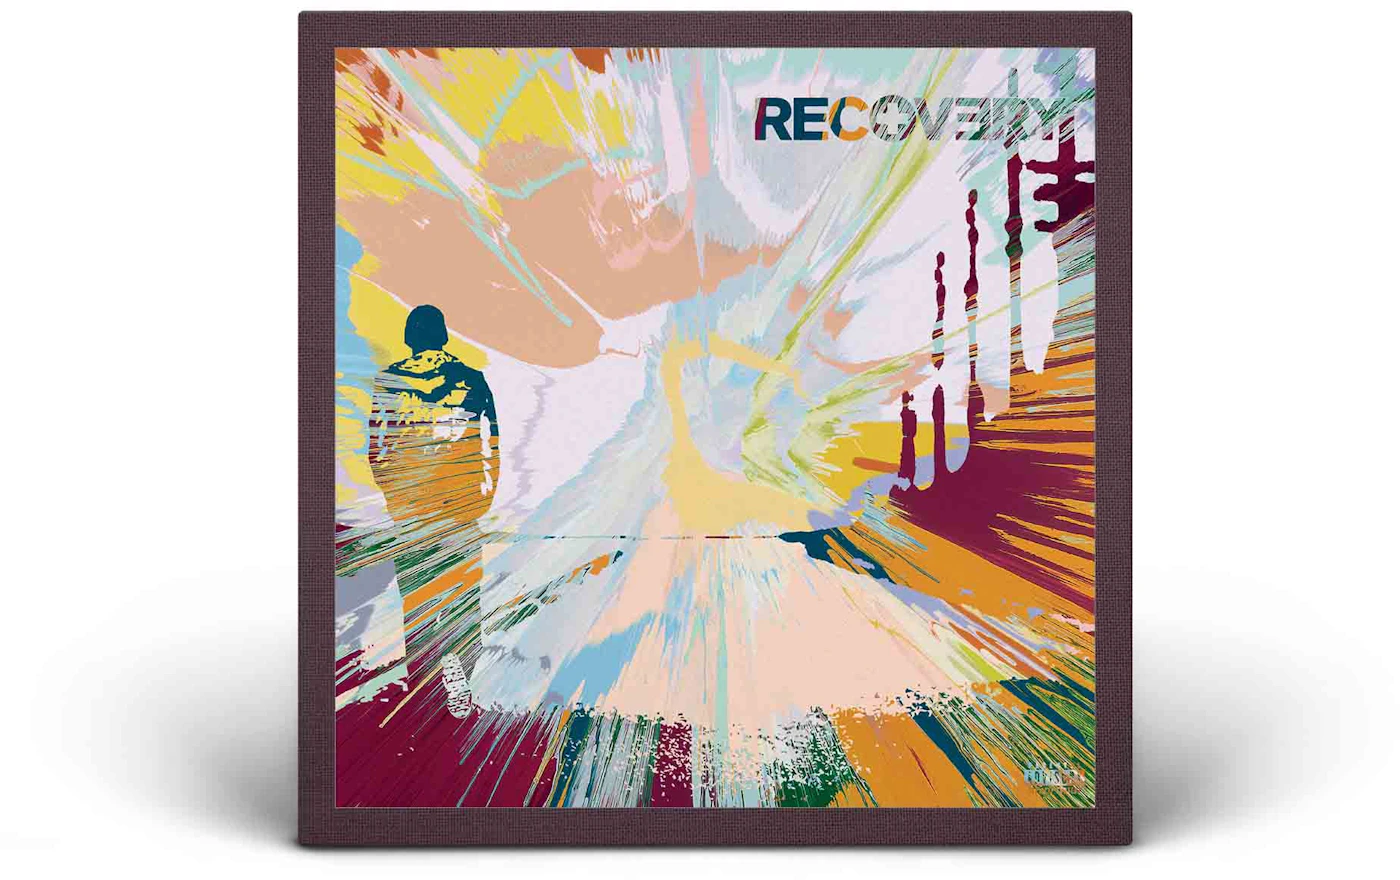 Interscope Records Eminem - Recovery by Damien Hirst Gallery Vinyl Record  (Signed, Edition of 100) - SS22 - US